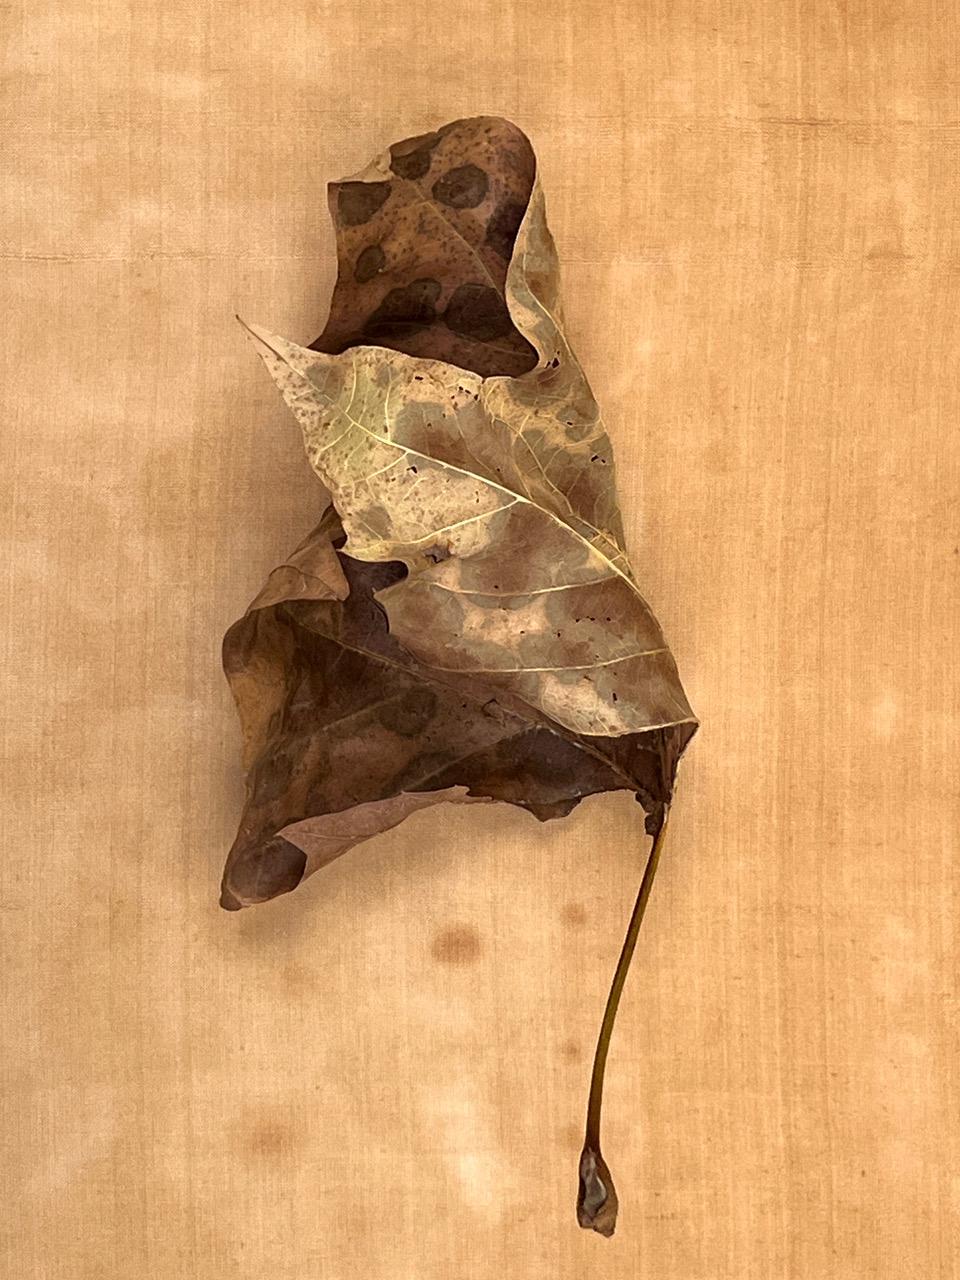 Paul Cava Still-Life Photograph - Untitled #3569 from "Leaves" series: nature still-life leaf photograph w/ gold